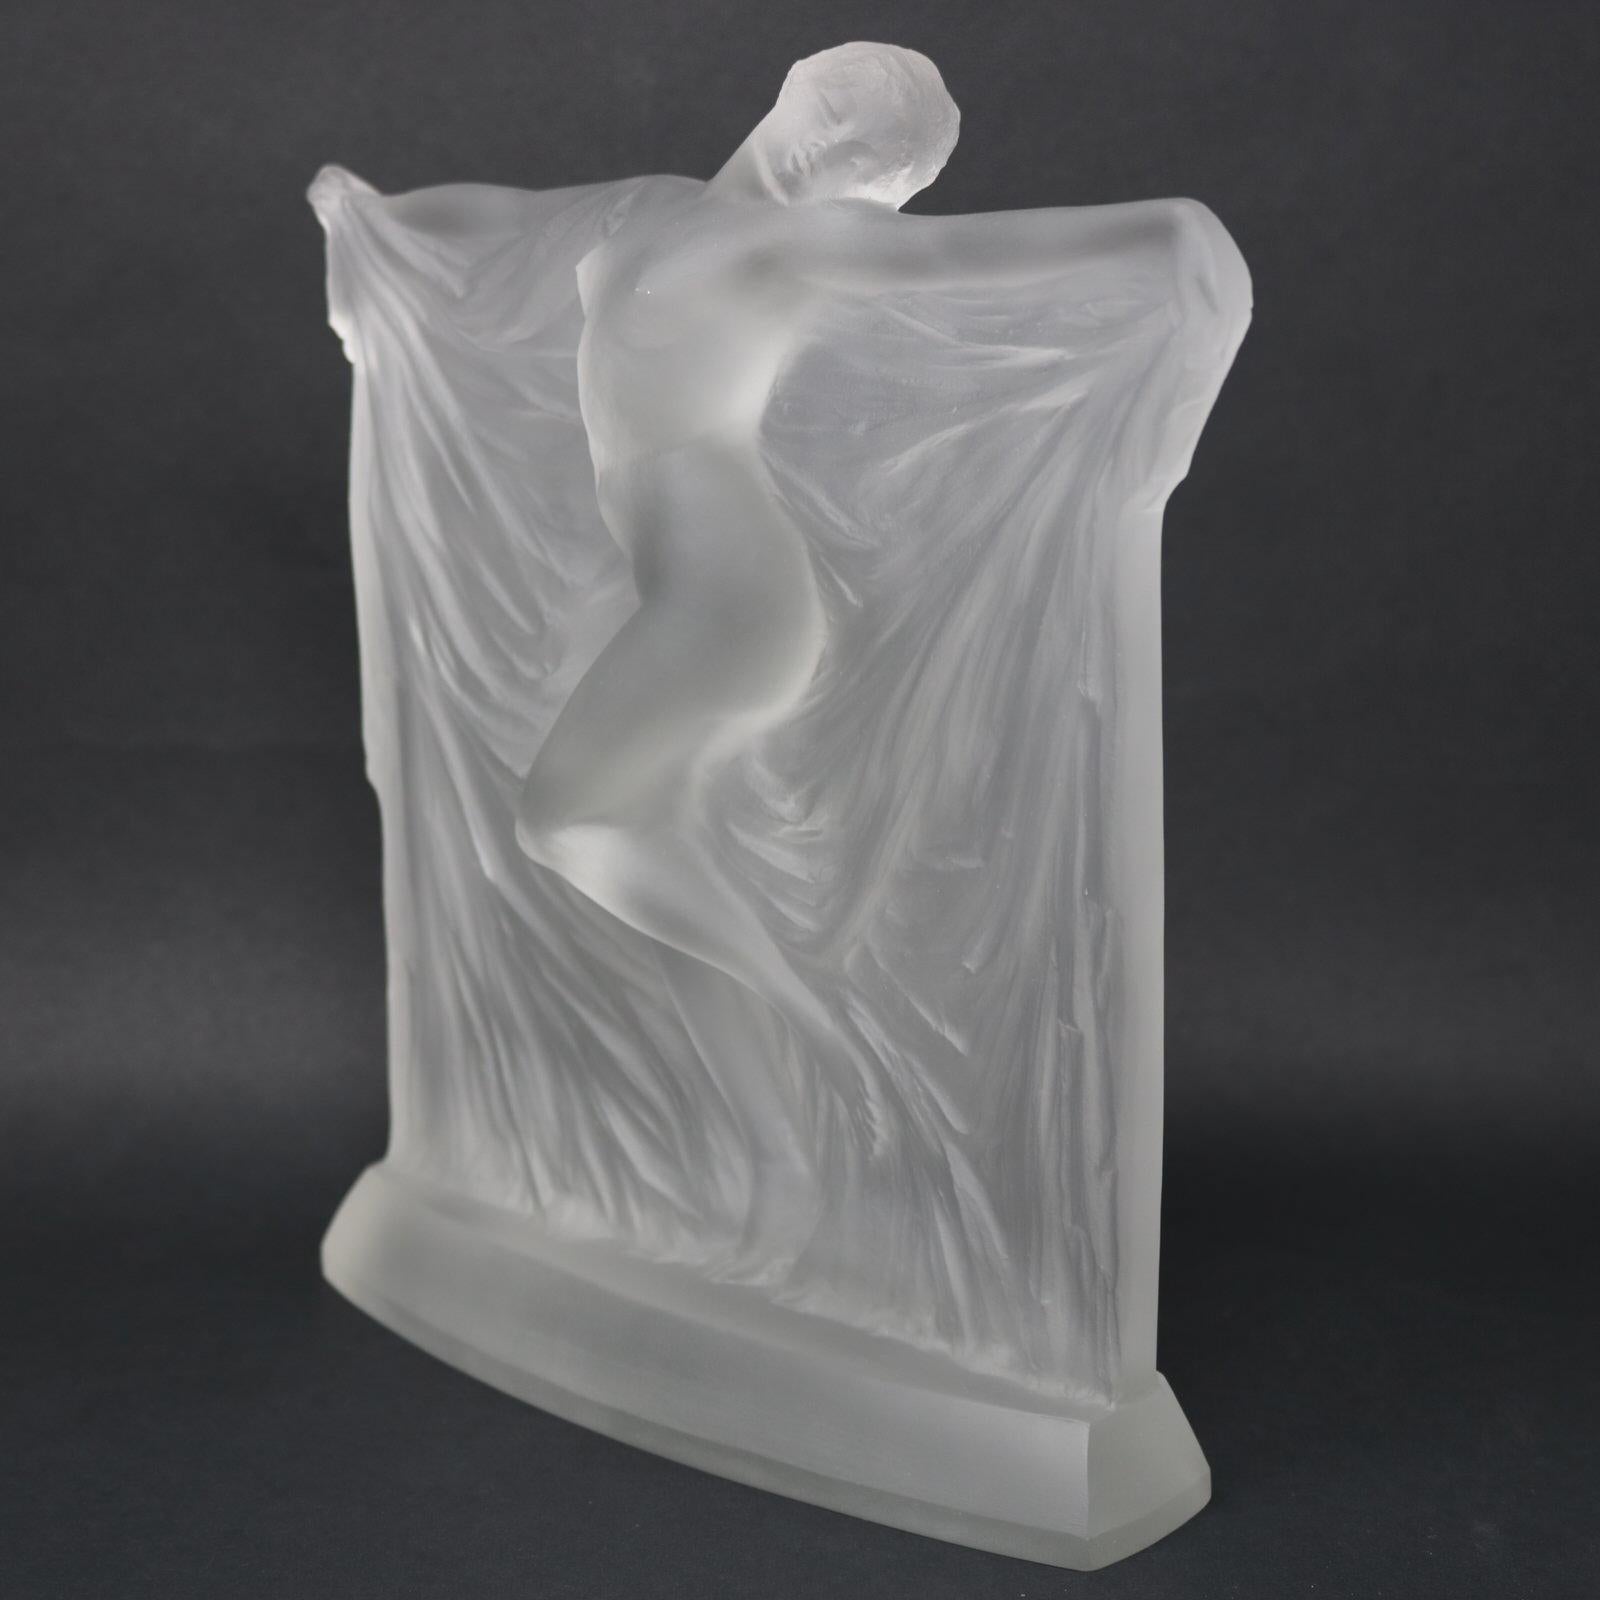 Lalique Frosted glass 'Thais' Statuette. This figure features an elegant dancing nude, head tilted, her arms held out to her sides, holding a drape. Wheel cut makers mark, 'R LALIQUE' to the reverse. Book reference: Marcilhac 834.